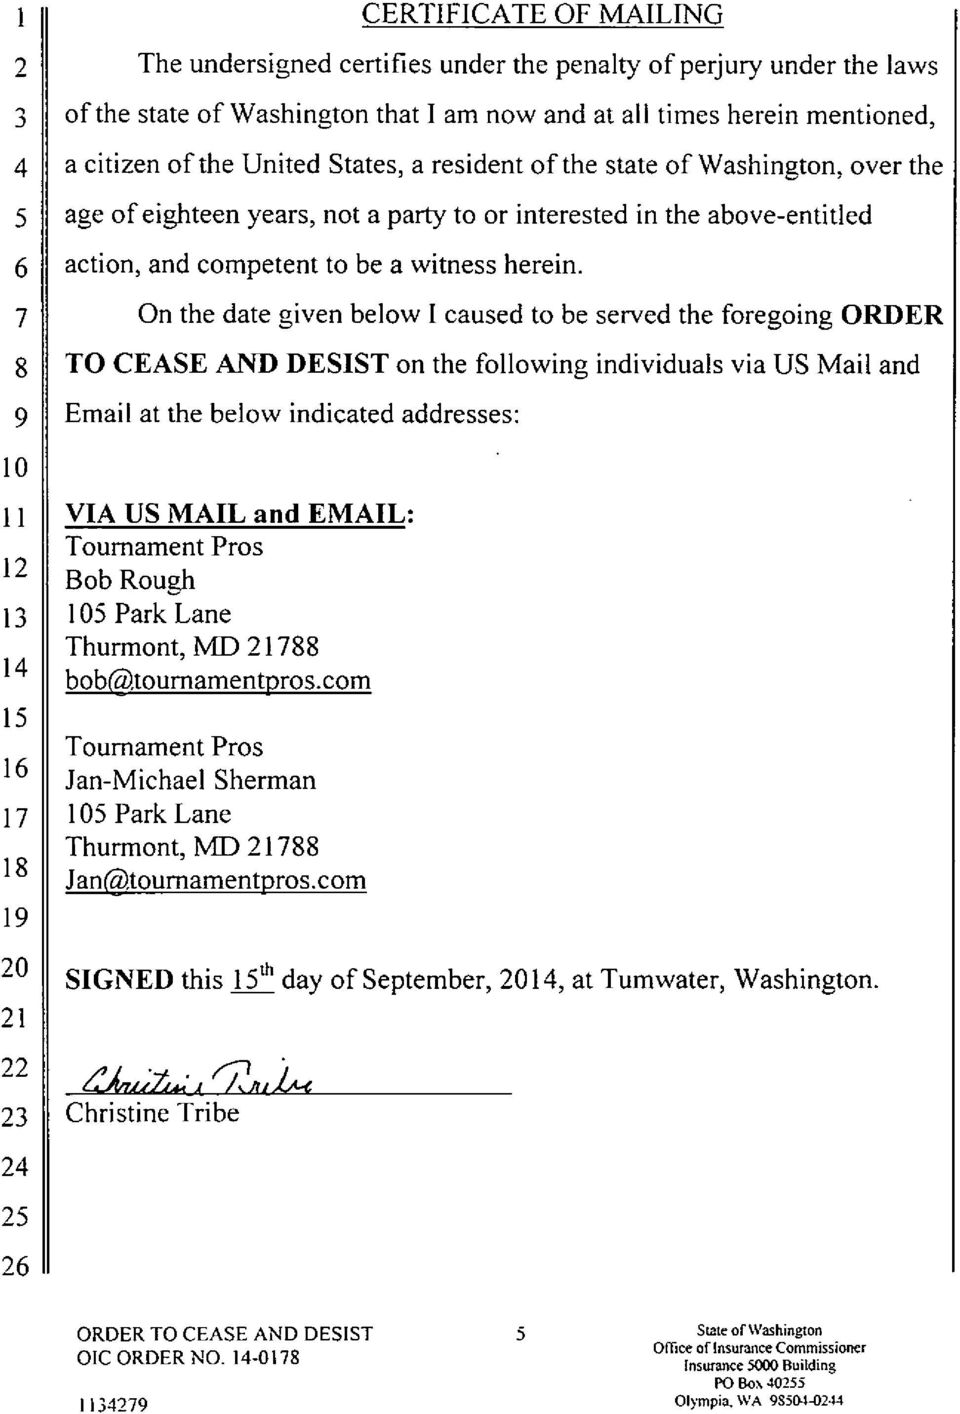 On the date given below I caused to be served the foregoing ORDER TO CEASE AND DESIST on the following individuals via US Mail and Email at the below indicated addresses: VIA US MAIL and EMAIL: